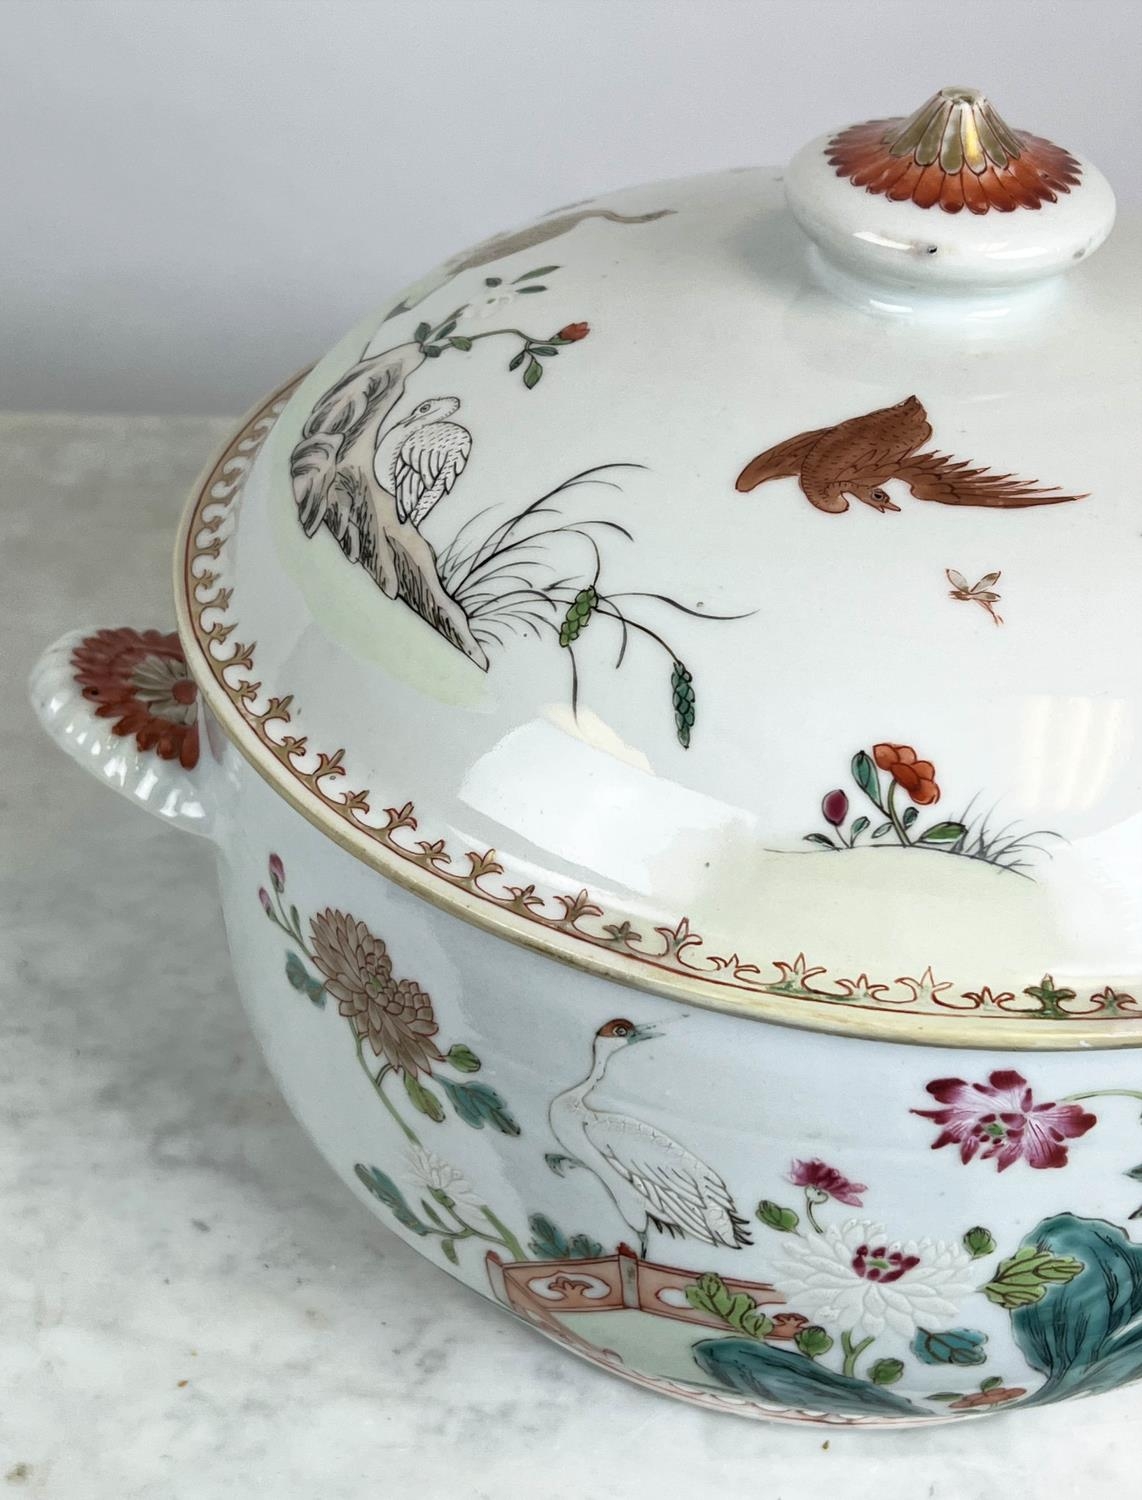 CHINESE EXPORT SOUP TUREEN, 19th century famille rose, decorated with cranes in garden scenes. - Image 6 of 9